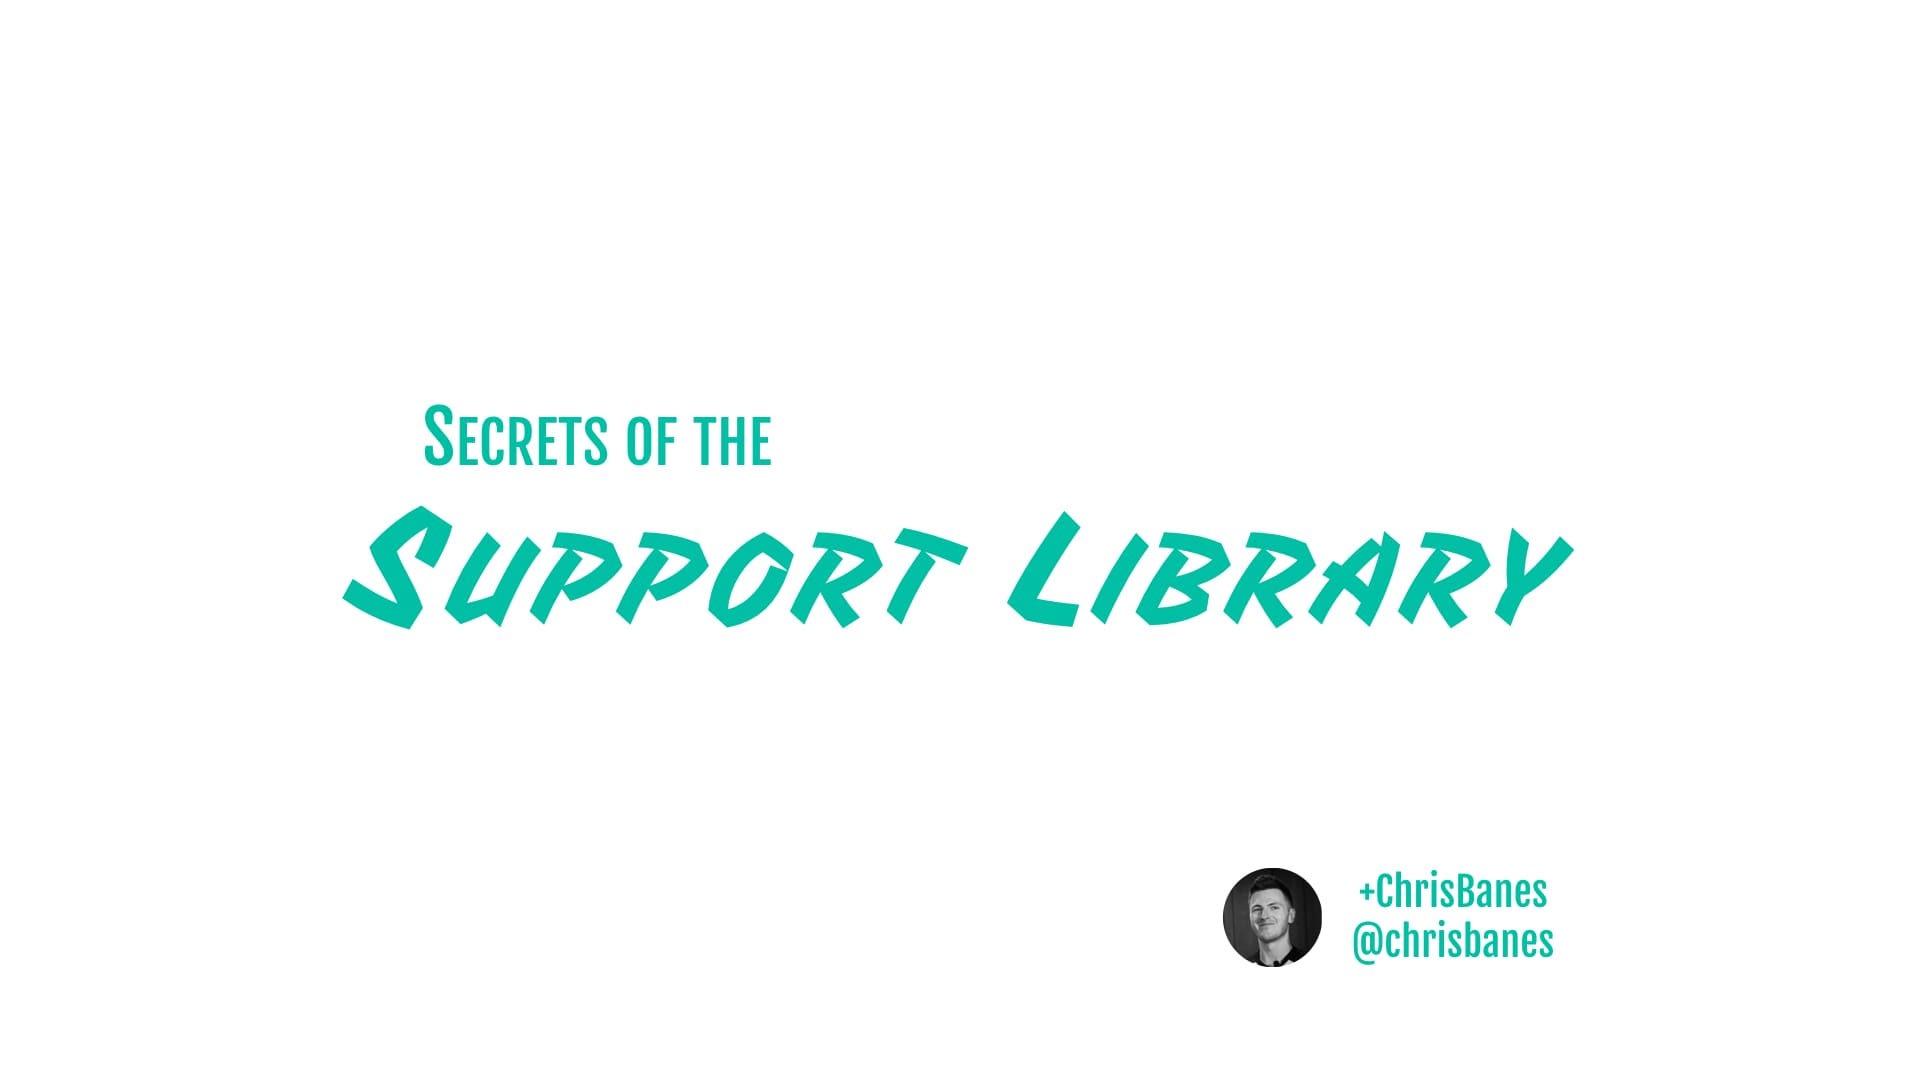 Secrets of the Support Library